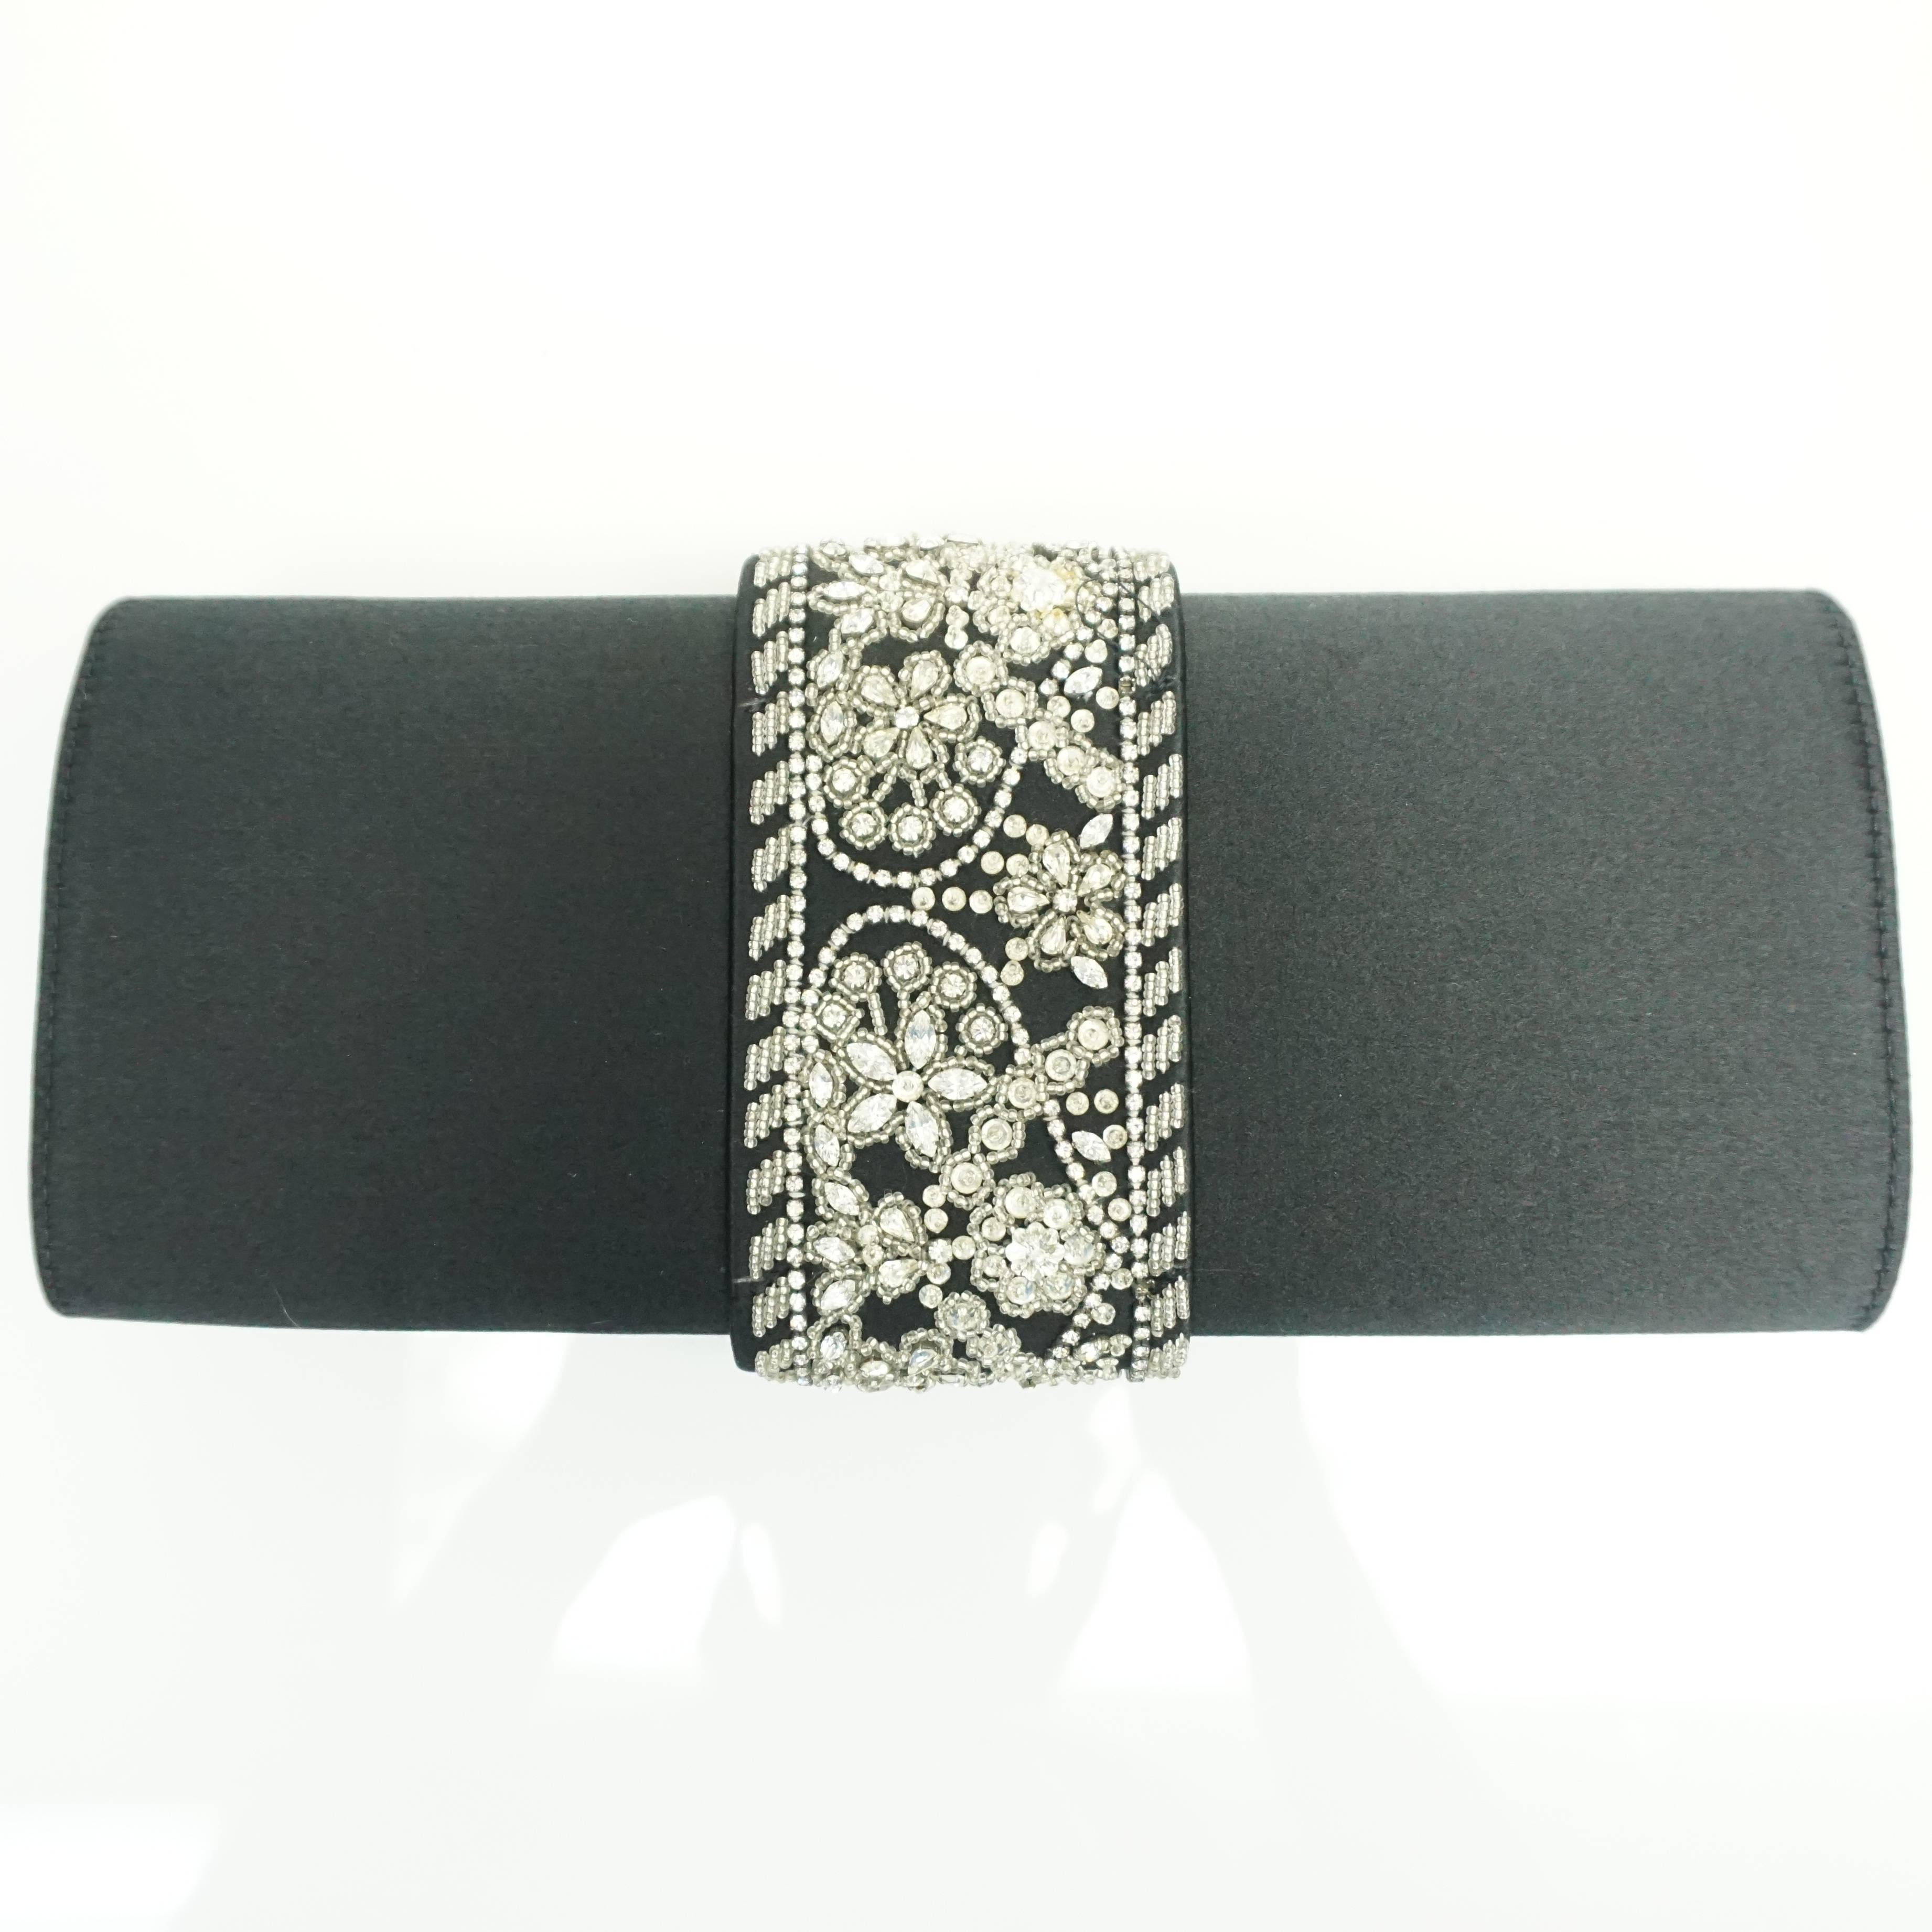 Oscar de la Renta Black Satin Clutch with Rhinestone Detail  This beautiful foldover clutch is made of black satin and has a 2.5